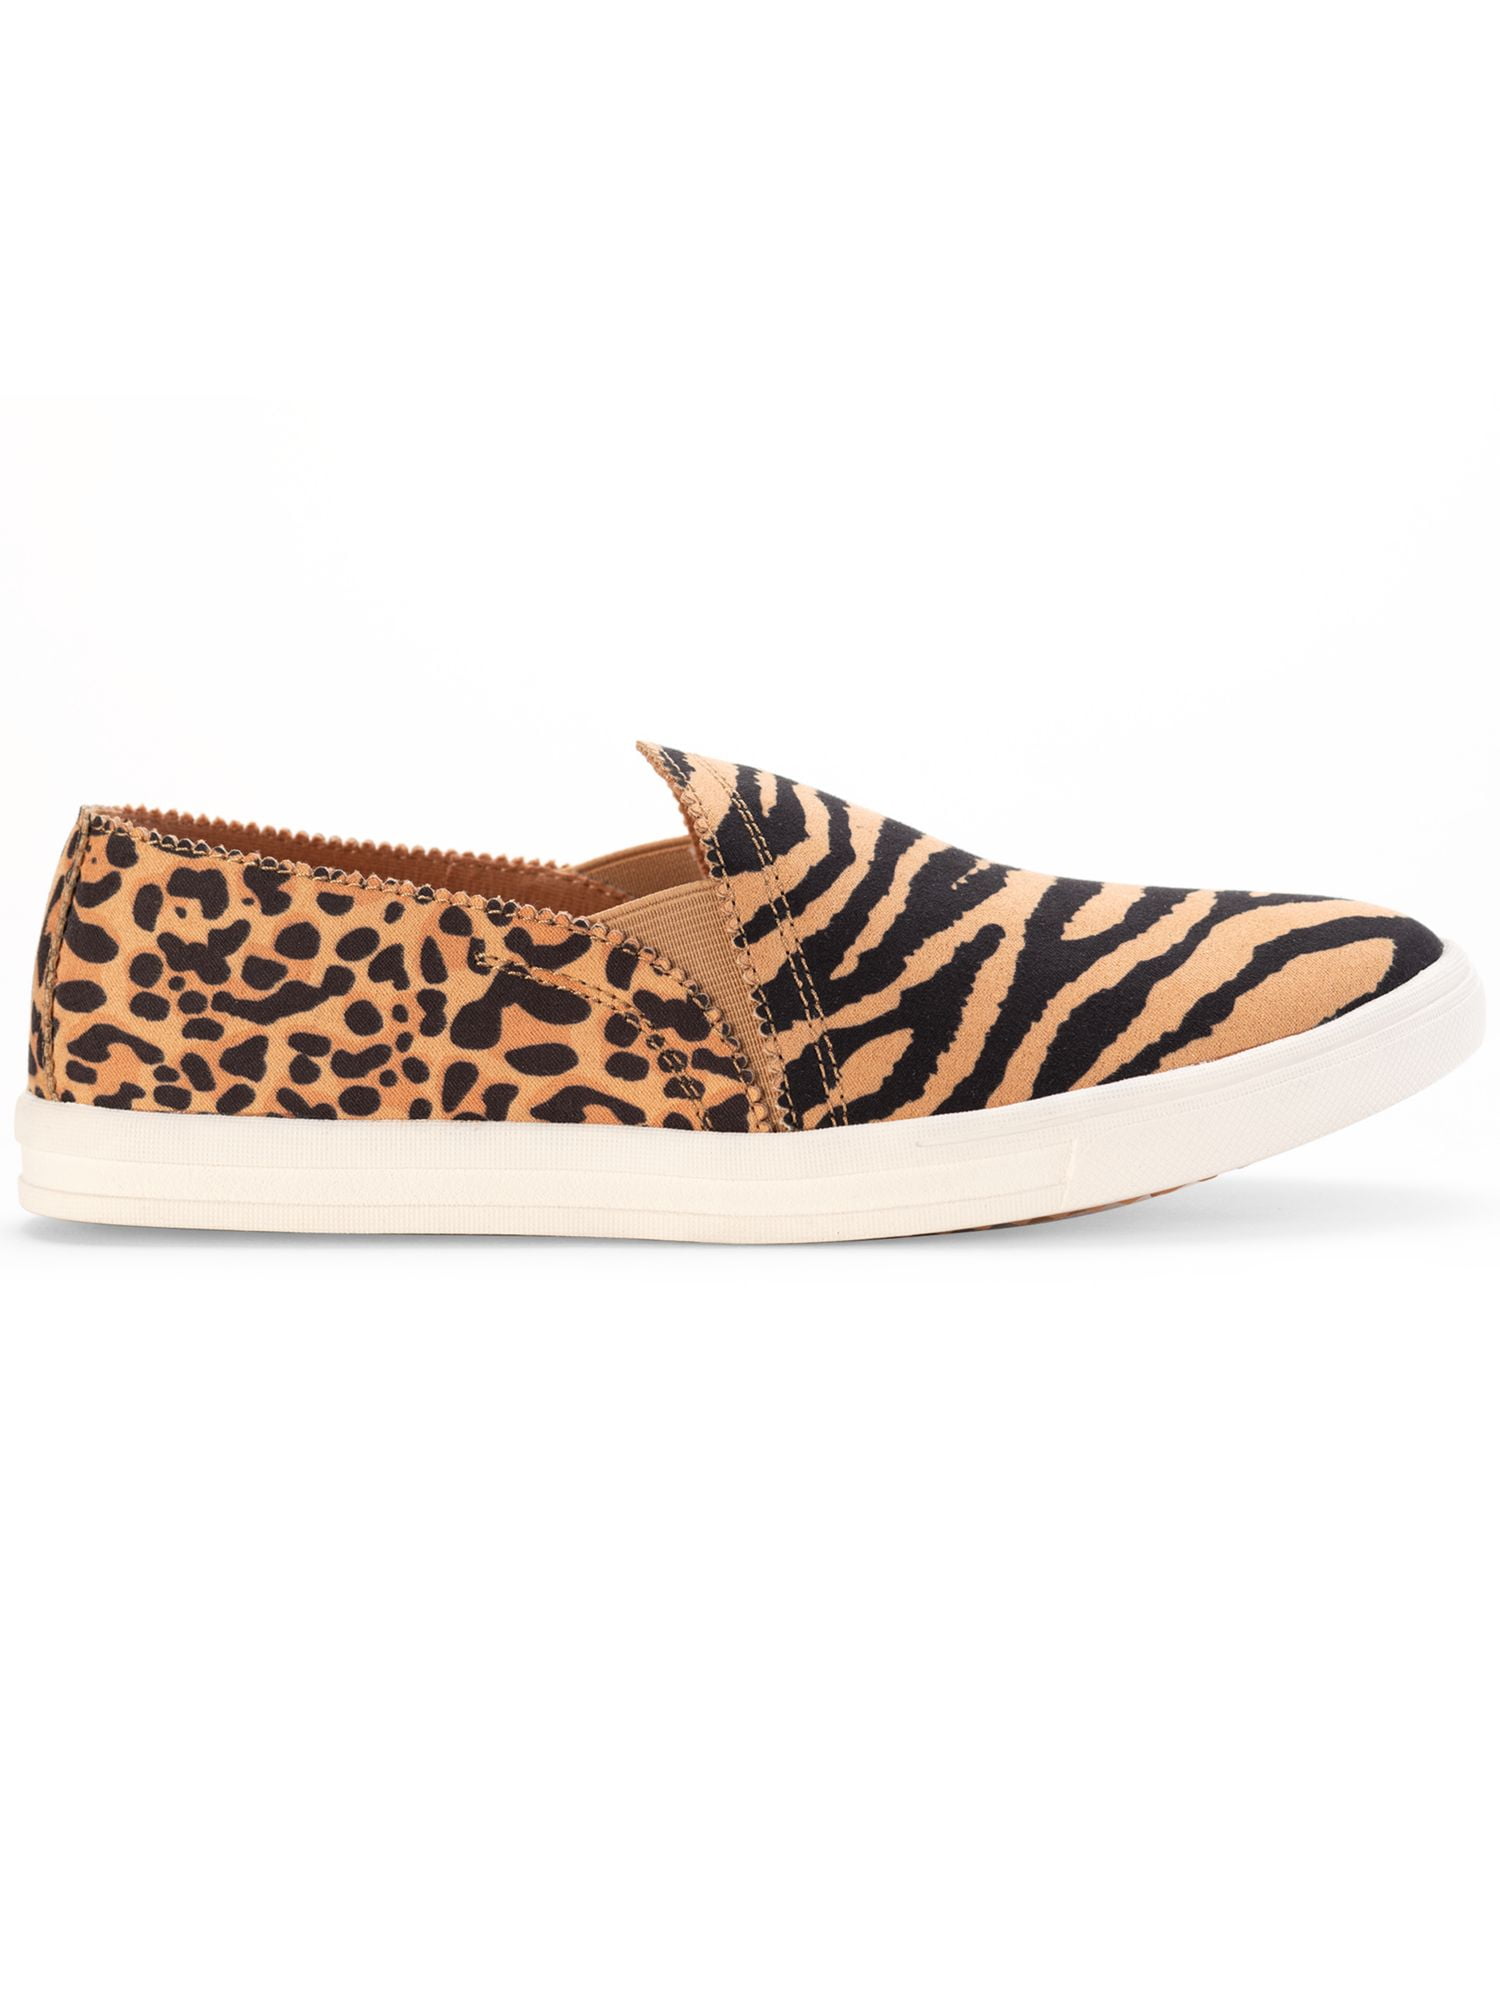 Buy Tiger Print Women's Sneakers, Fashion Trending Animal Print Tiger  Sneakers, Womens Fashion Shoes, Street Style Tiger Sneakers Online in India  - Etsy